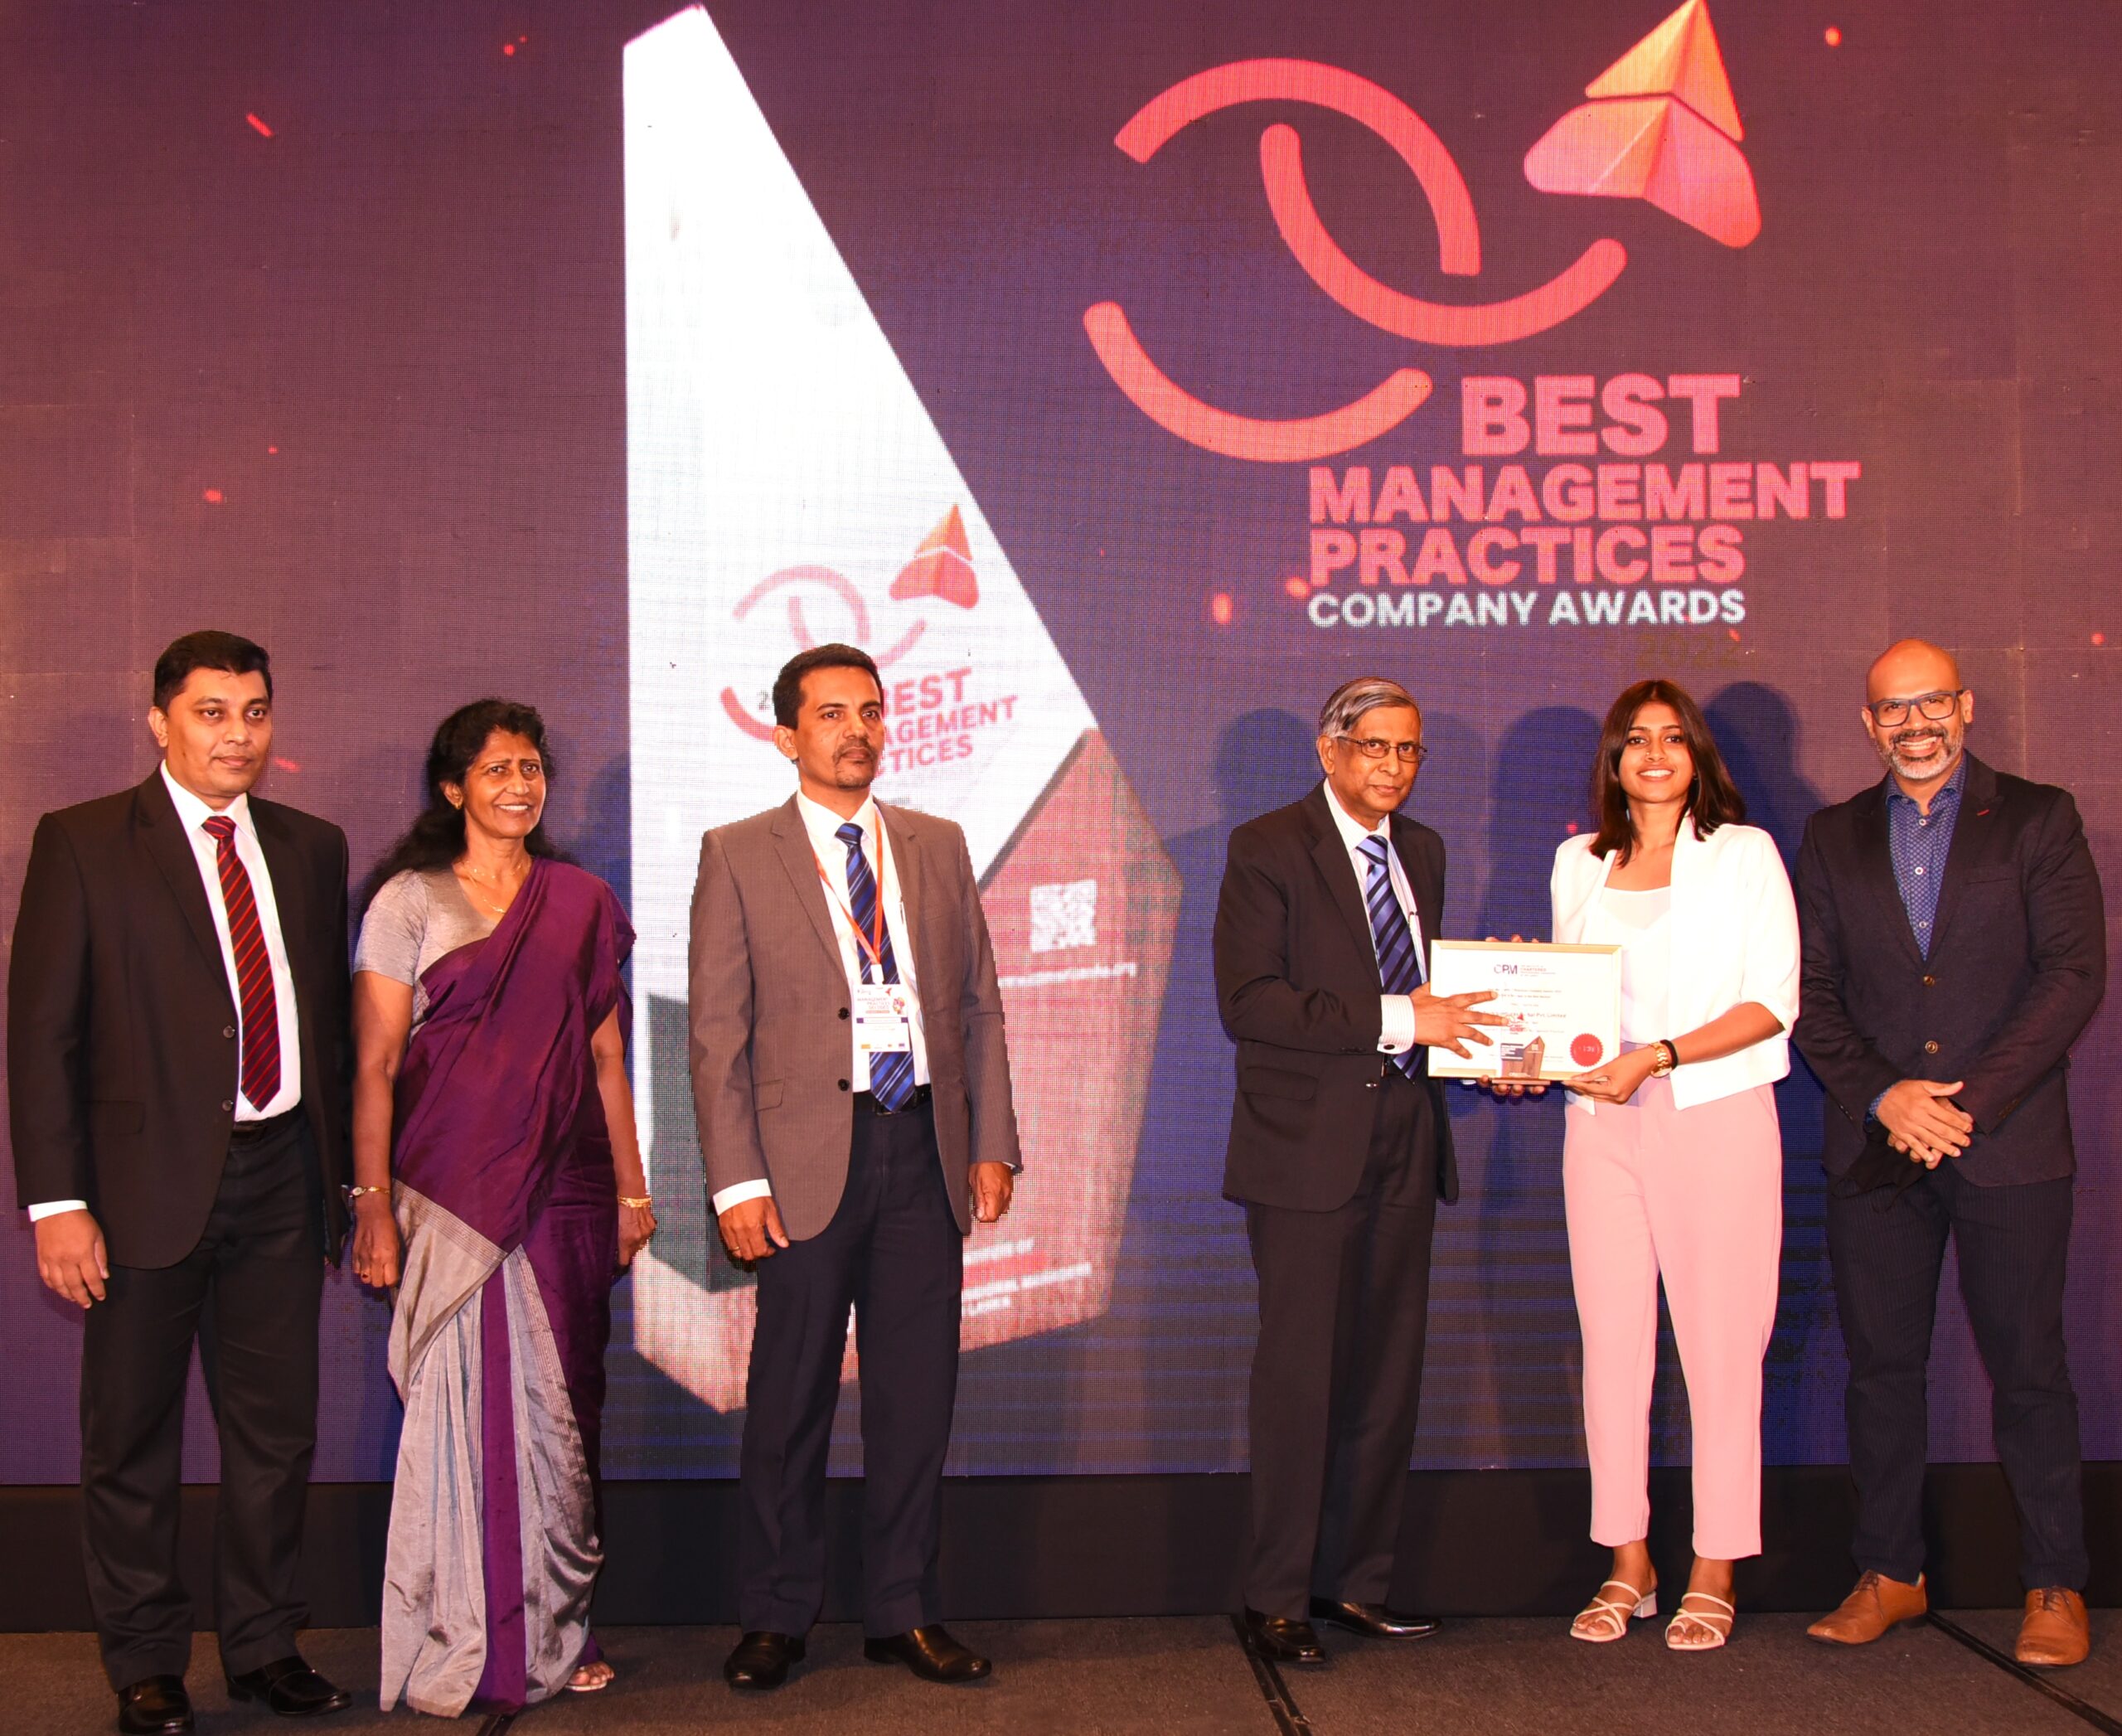 Tech Venturas is awarded with Special Recognition for Best Management Practices at the CPM International Management Conference 2022